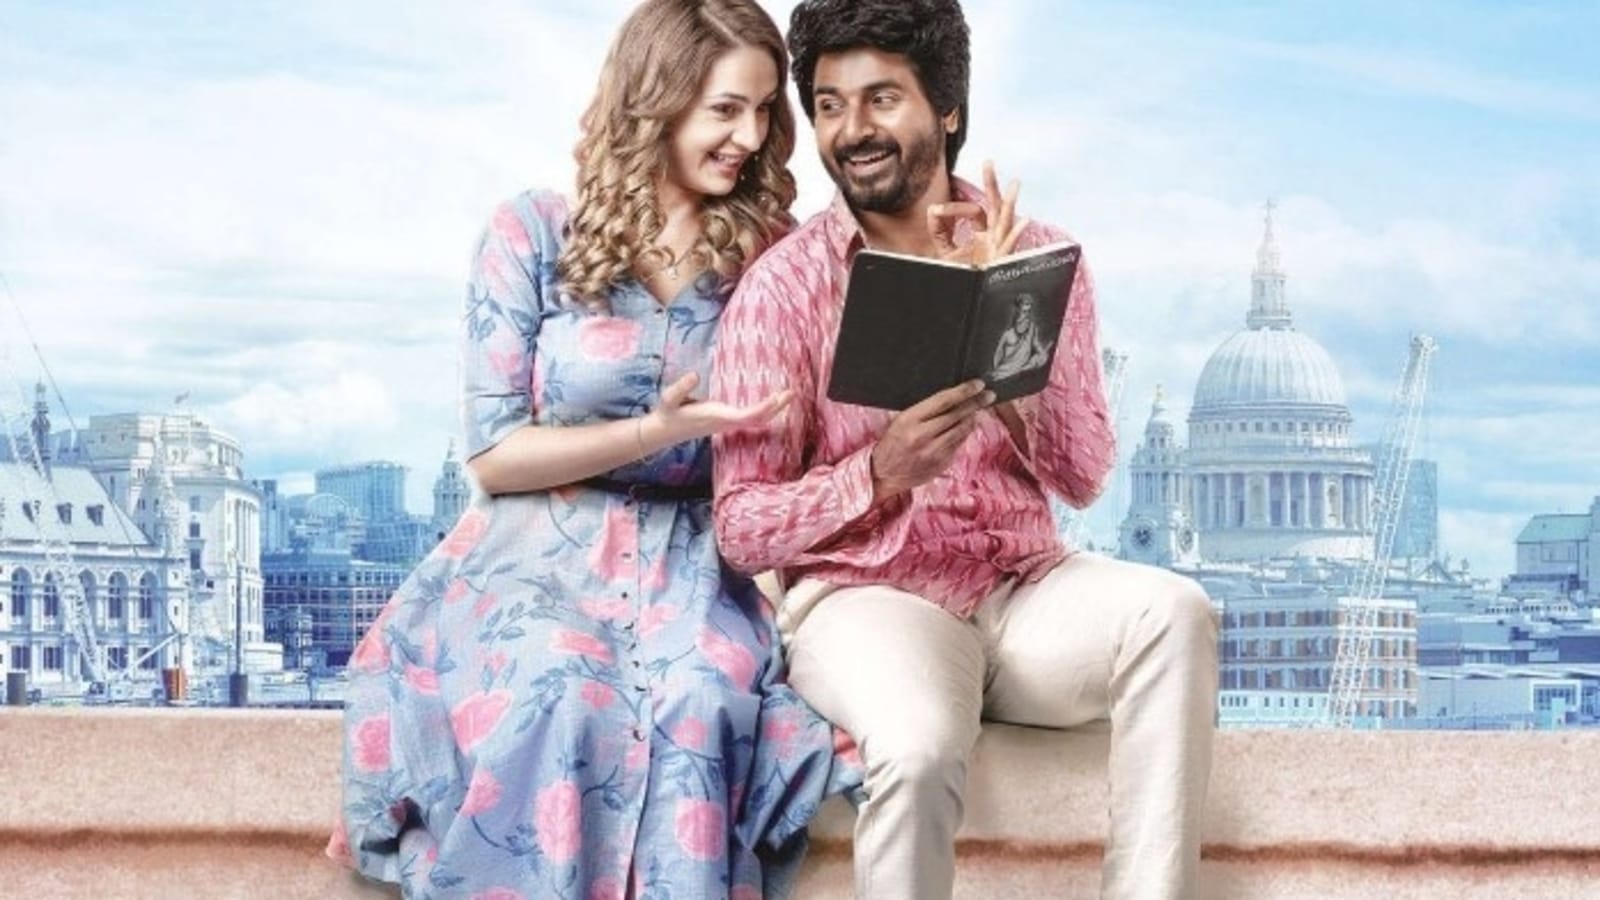 prince-movie-review-sivakarthikeyan-s-charm-makes-this-silly-quirky-comedy-fun